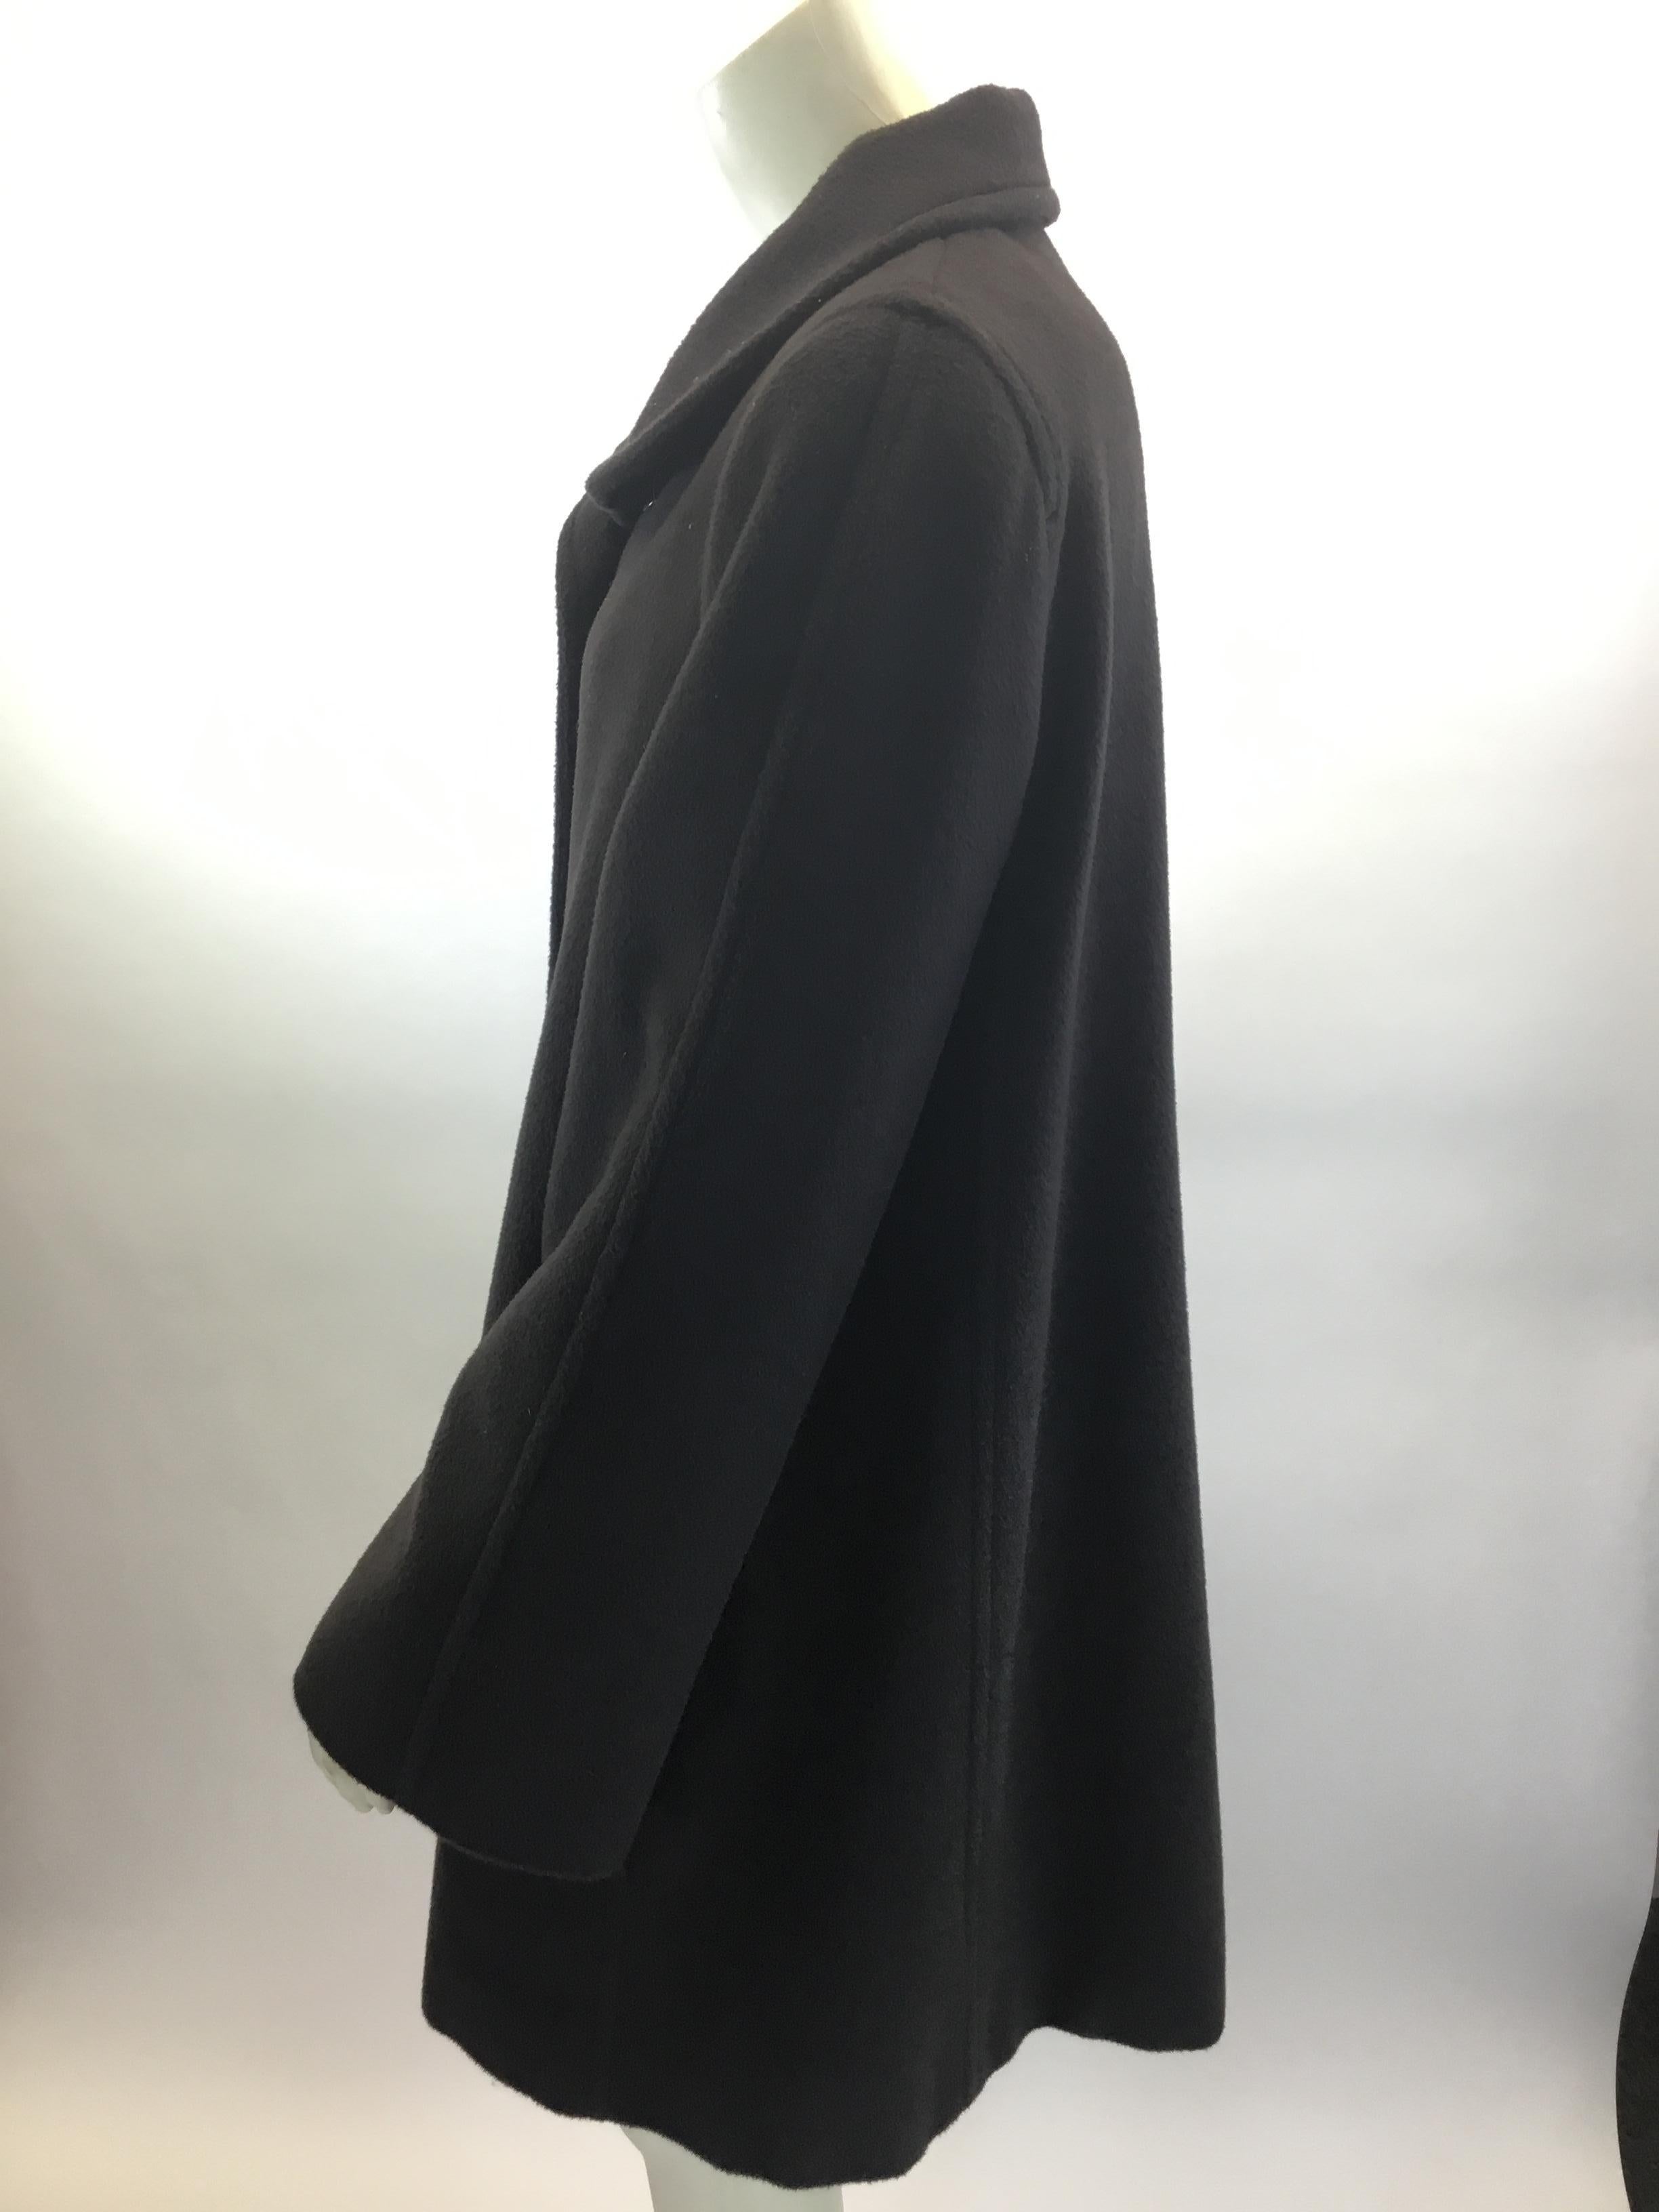 Armani Collezioni Brown Wool and Cashmere Coat
$450
Made in Italy
92% Wool, 8% Cashmere
Size 42
Length 34.5”
Bust 40”
Waist 41”